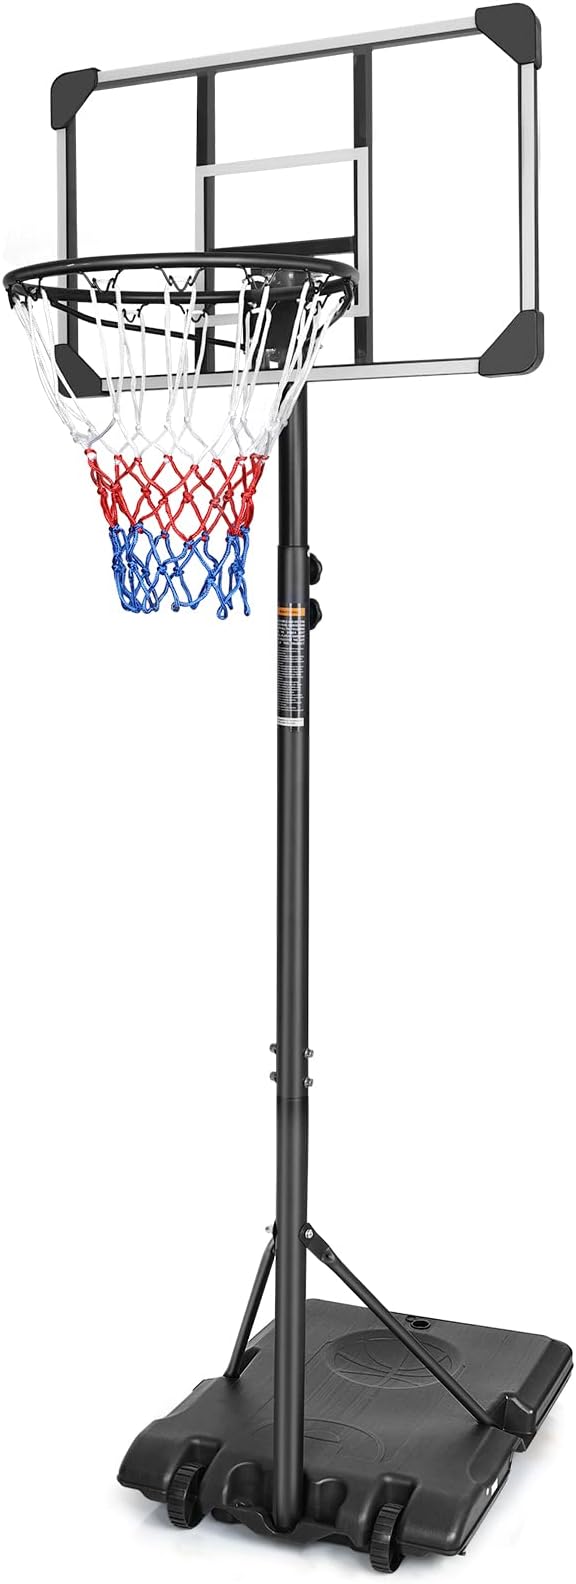 kuikui portable basketball goal system stable baseandwheels indoor/outdoor height 5 6 to 7ft youth/teenagers